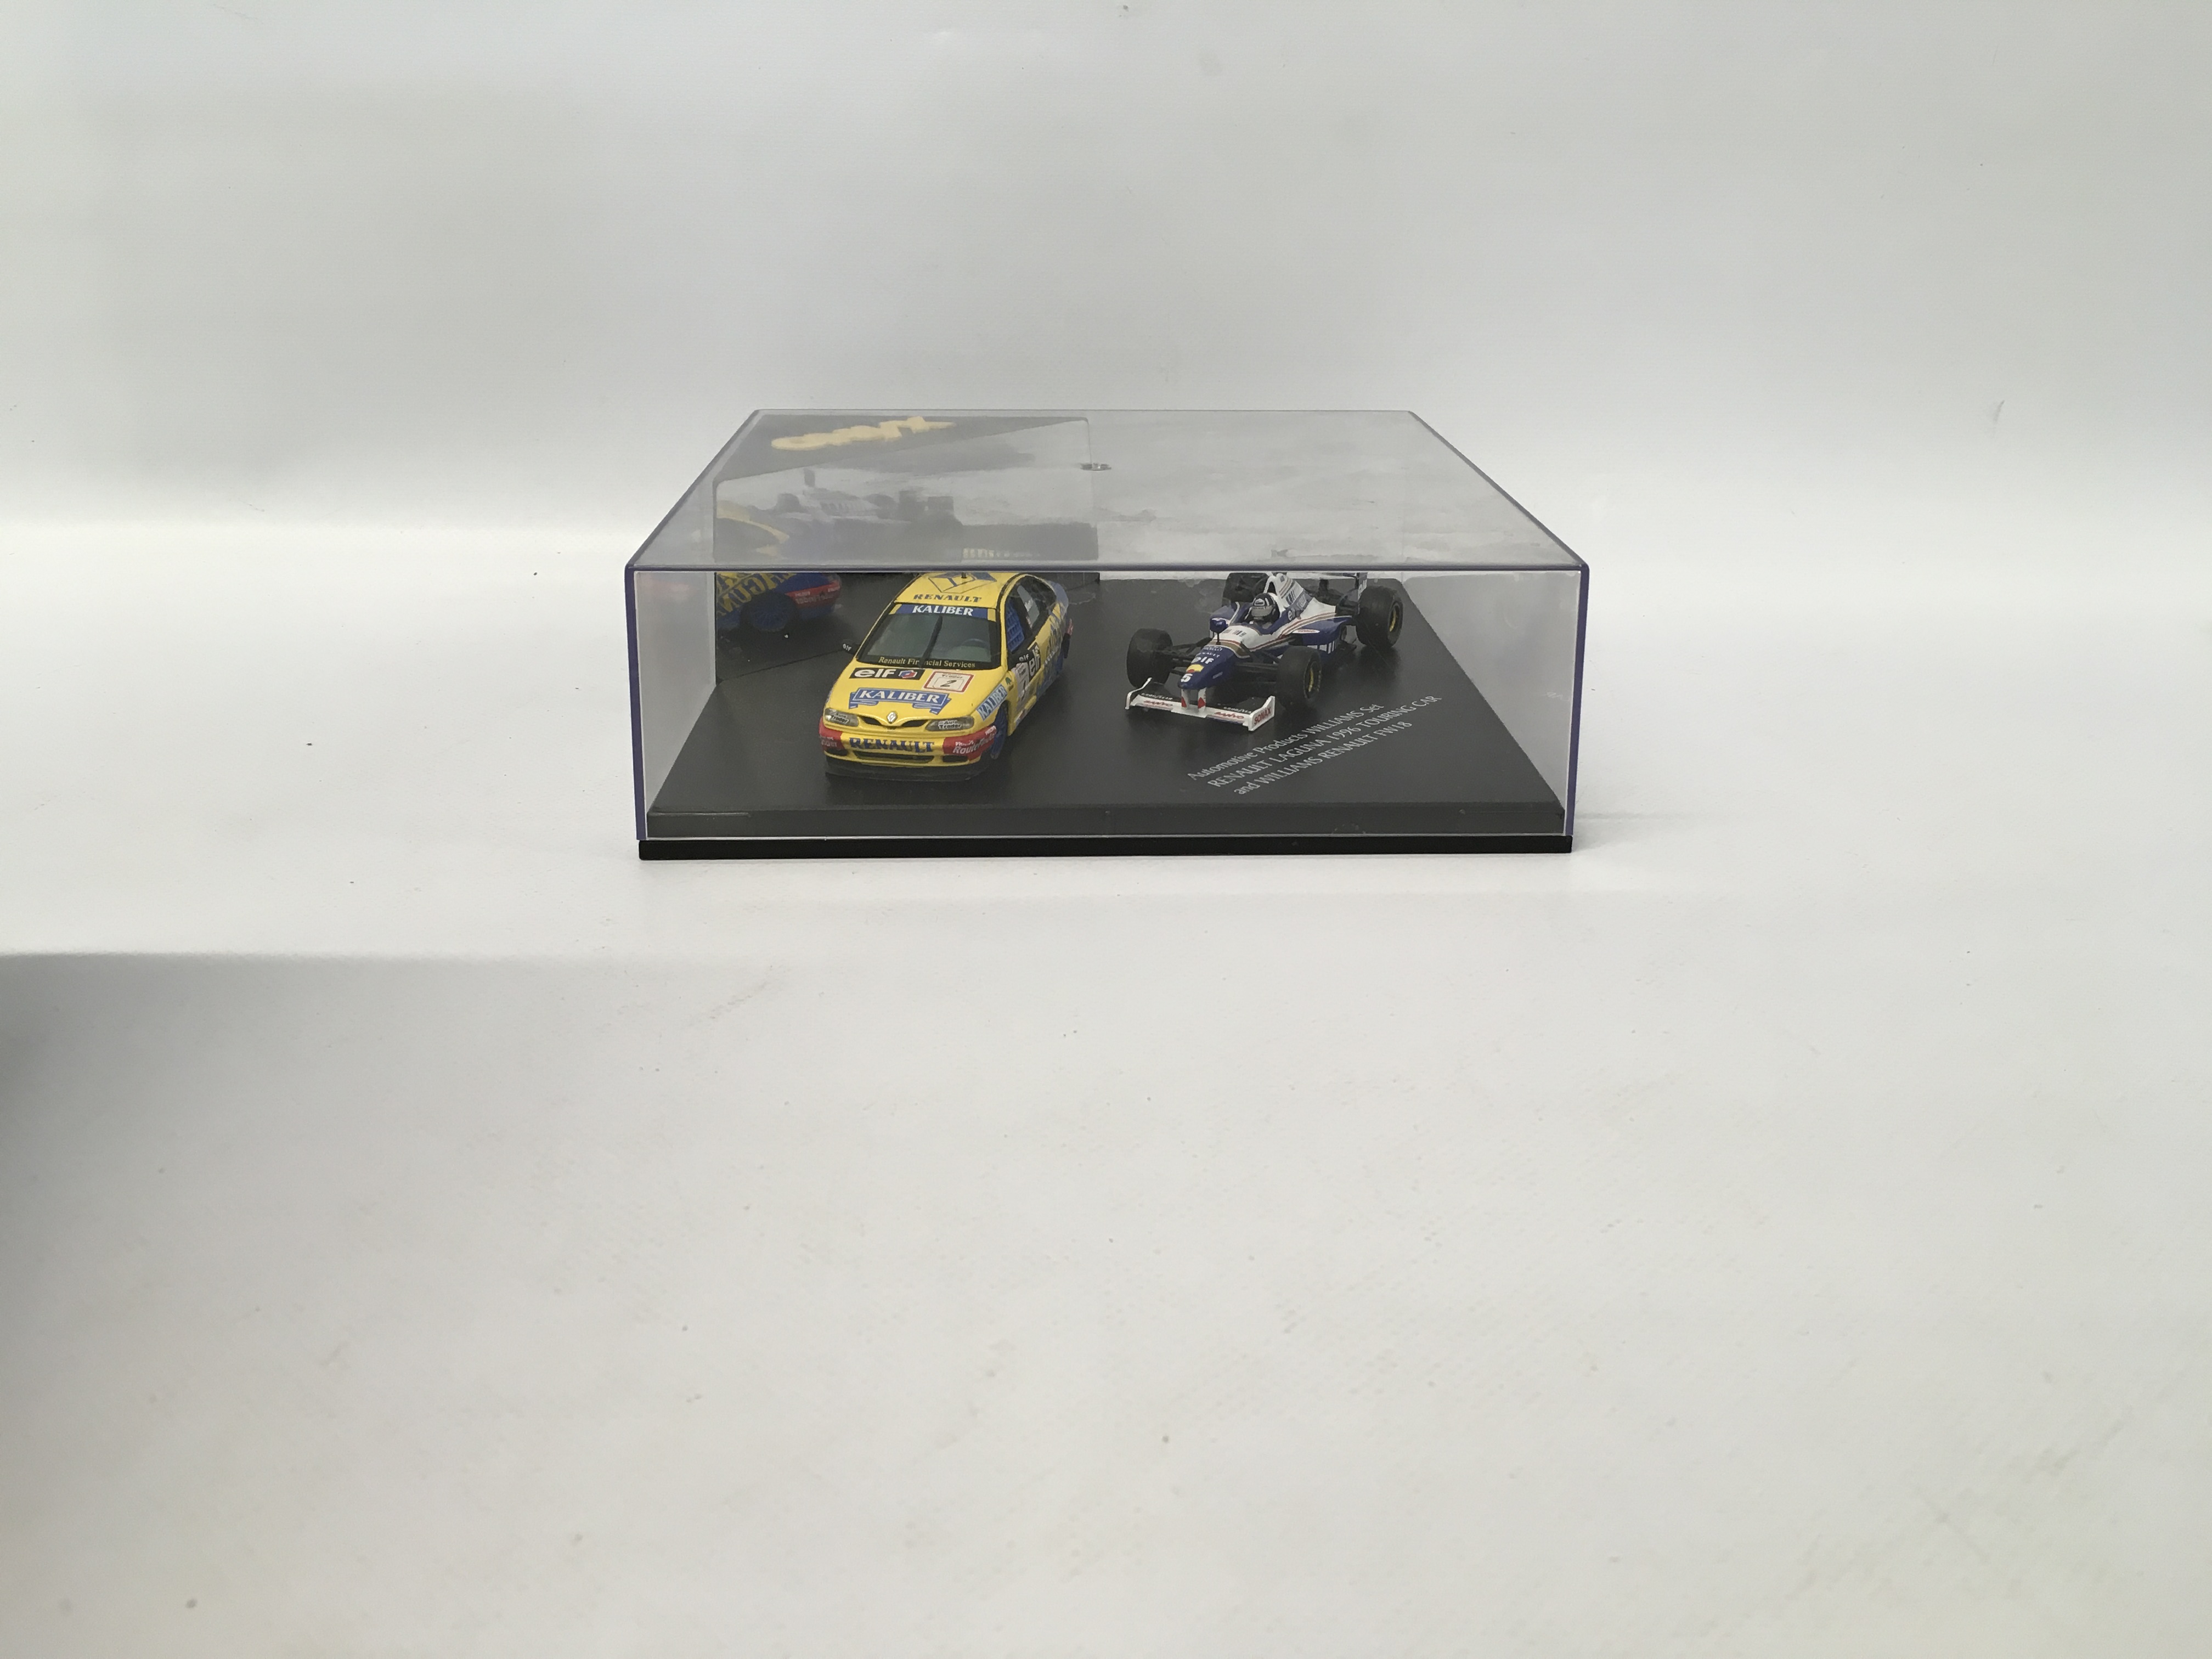 DIE-CAST RACING COLLECTABLE "WINSTON DRAG RACING" BOXED ALONG WITH AN ONYX FORMULA 1 MODELS RENAULT - Image 3 of 5